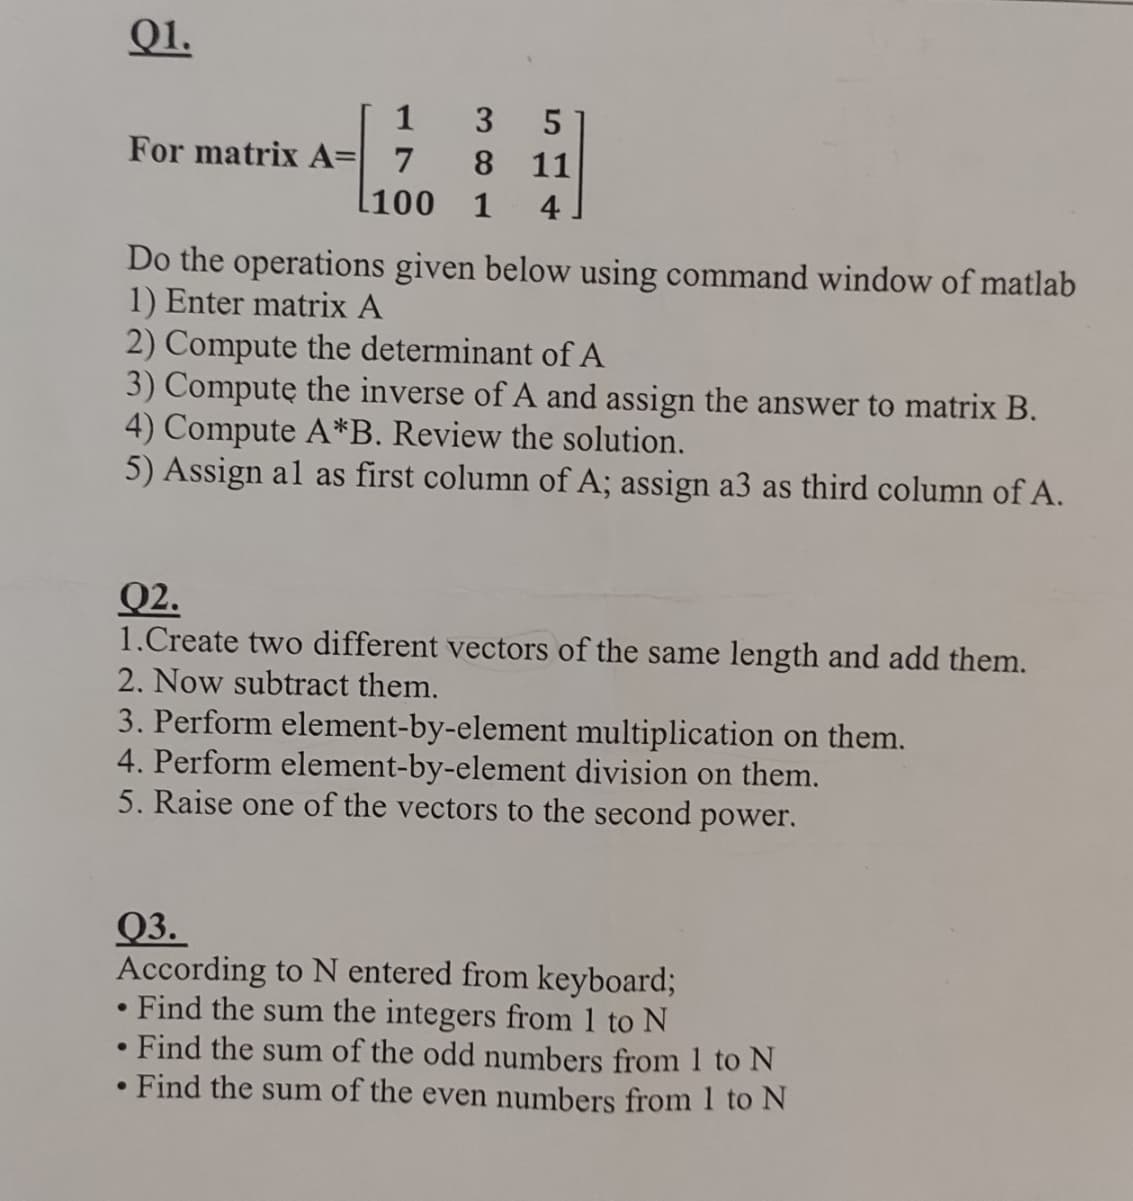 Q1.
[ 1
3
5
For matrix A= 7
8 11
[100 1 4
Do the operations given below using command window of matlab
1) Enter matrix A
2) Compute the determinant of A
3) Compute the inverse of A and assign the answer to matrix B.
4) Compute A*B. Review the solution.
5) Assign al as first column of A; assign a3 as third column of A.
Q2.
1.Create two different vectors of the same length and add them.
2. Now subtract them.
3. Perform element-by-element multiplication on them.
4. Perform element-by-element division on them.
5. Raise one of the vectors to the second power.
Q3.
According to N entered from keyboard;
•
•
Find the sum the integers from 1 to N
Find the sum of the odd numbers from 1 to N
Find the sum of the even numbers from 1 to N